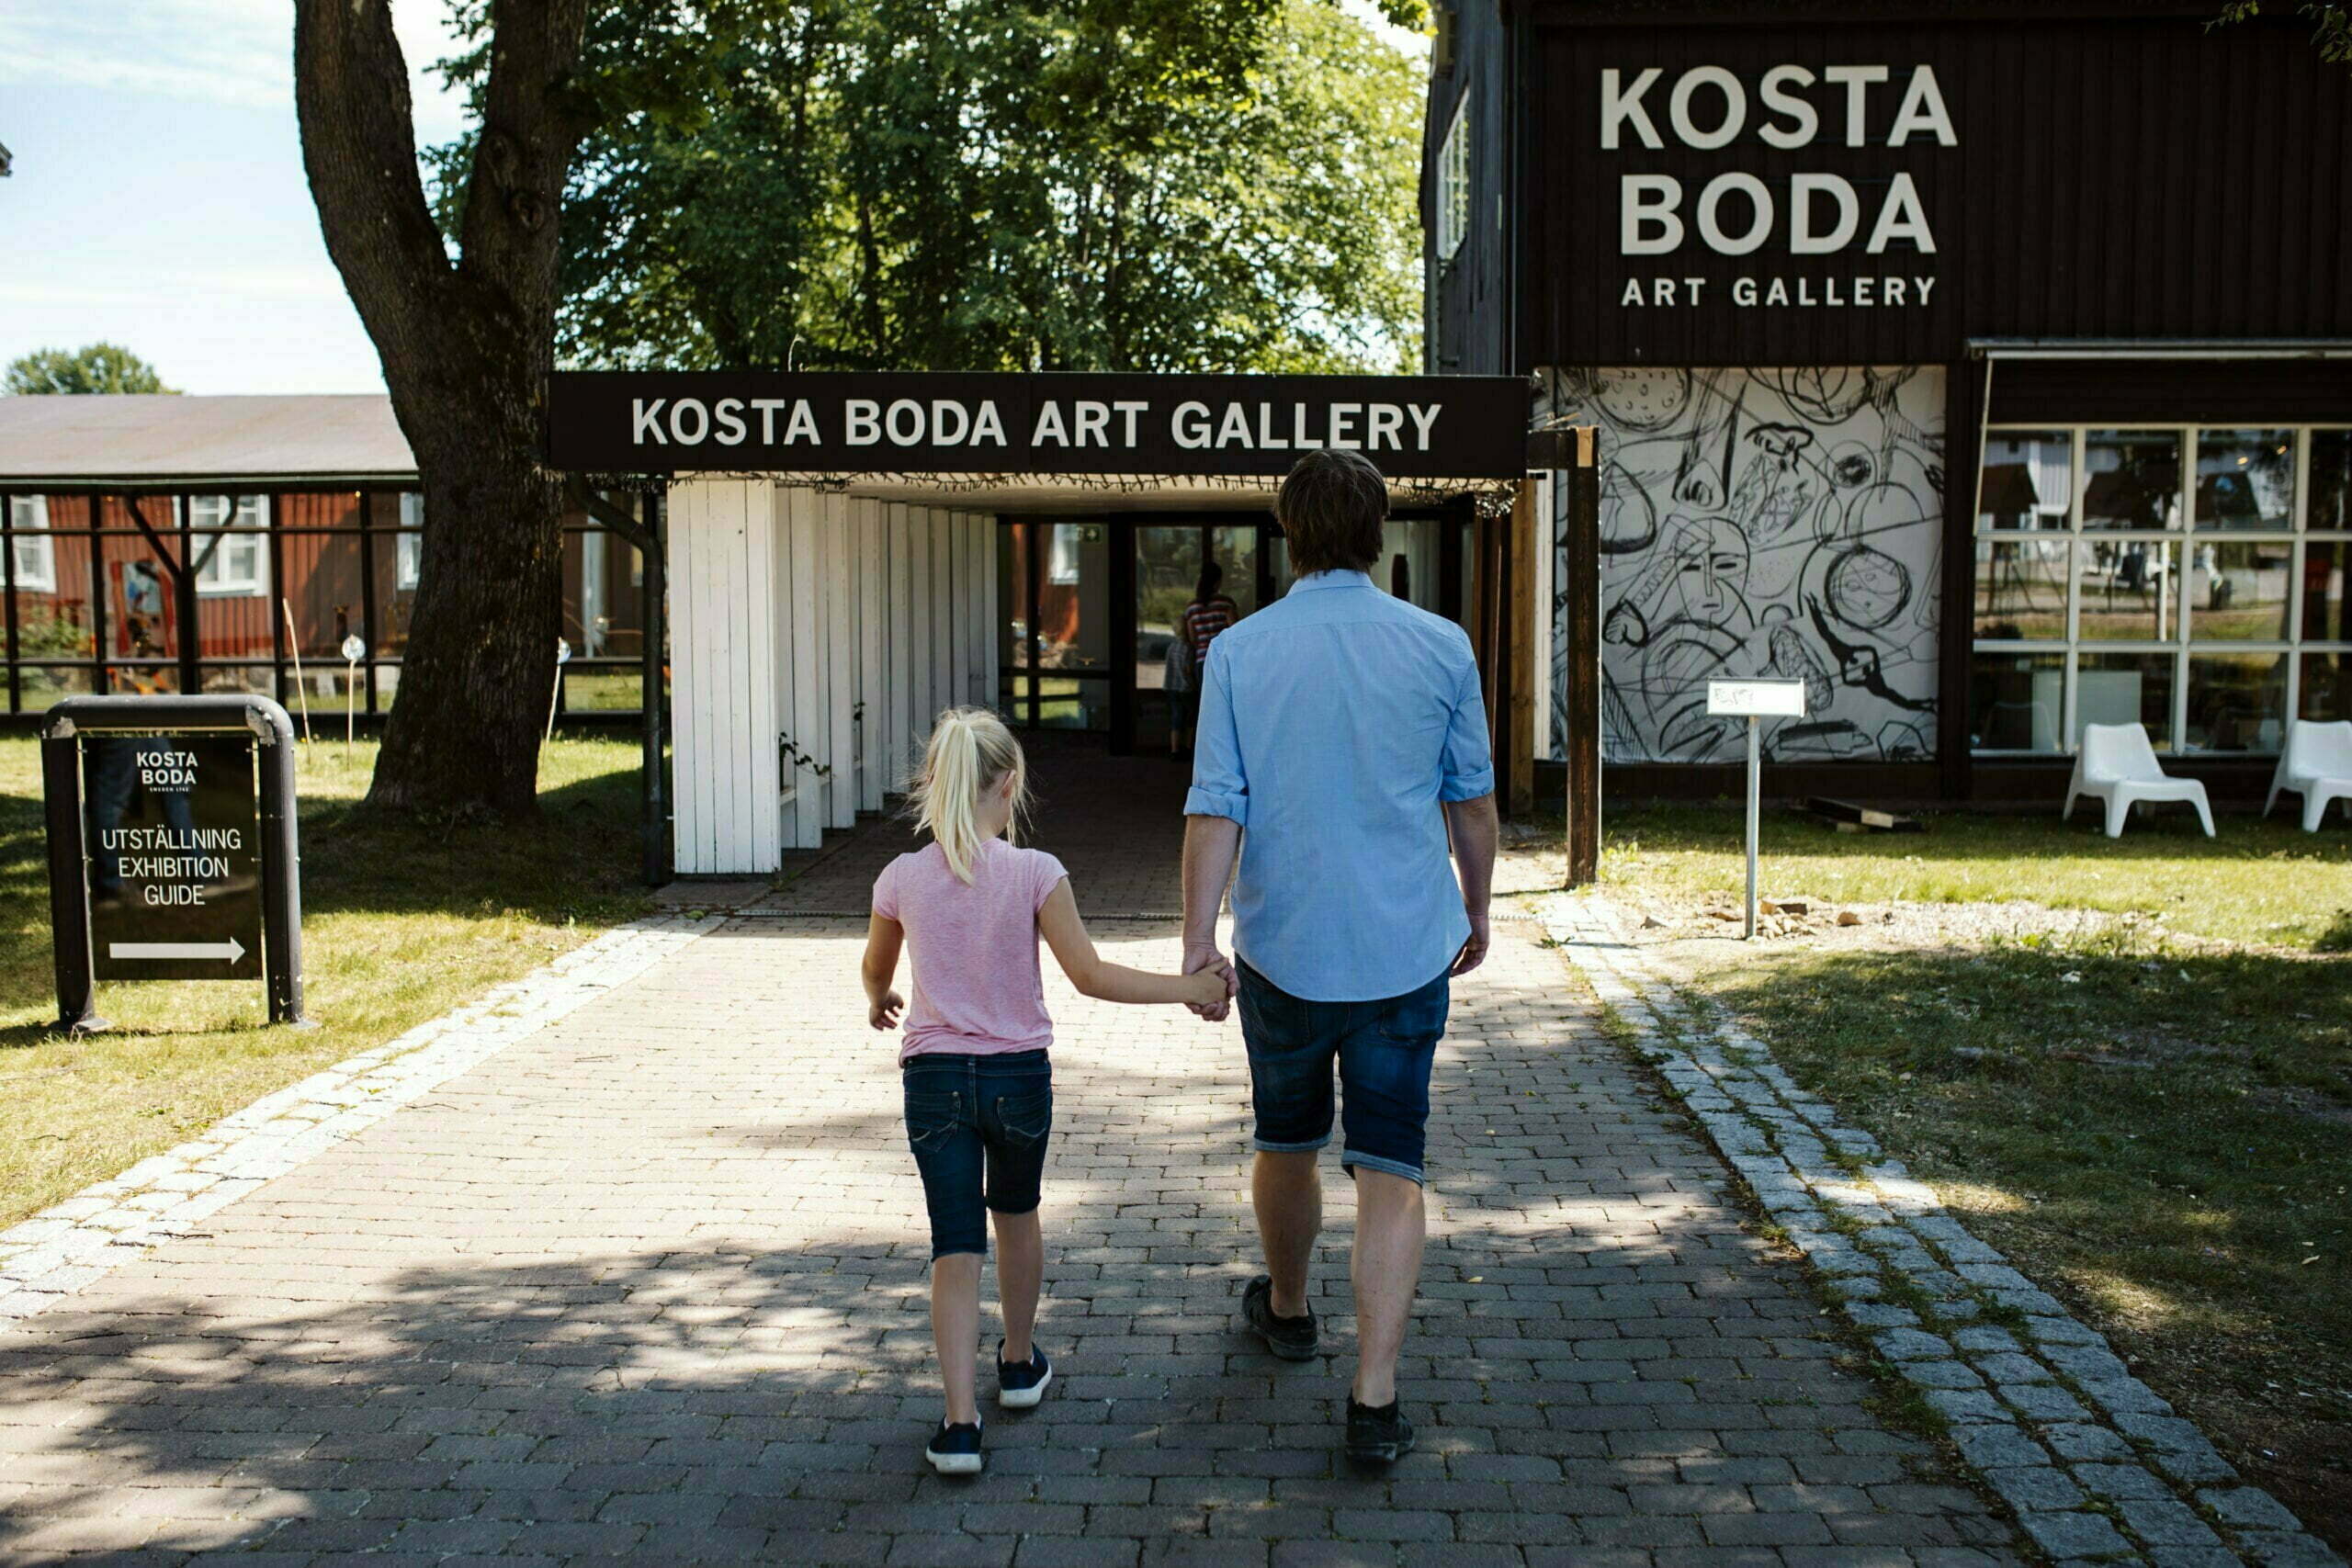 Children and adults who are on their way to Kosta Boda Art Gallery, Glasriket